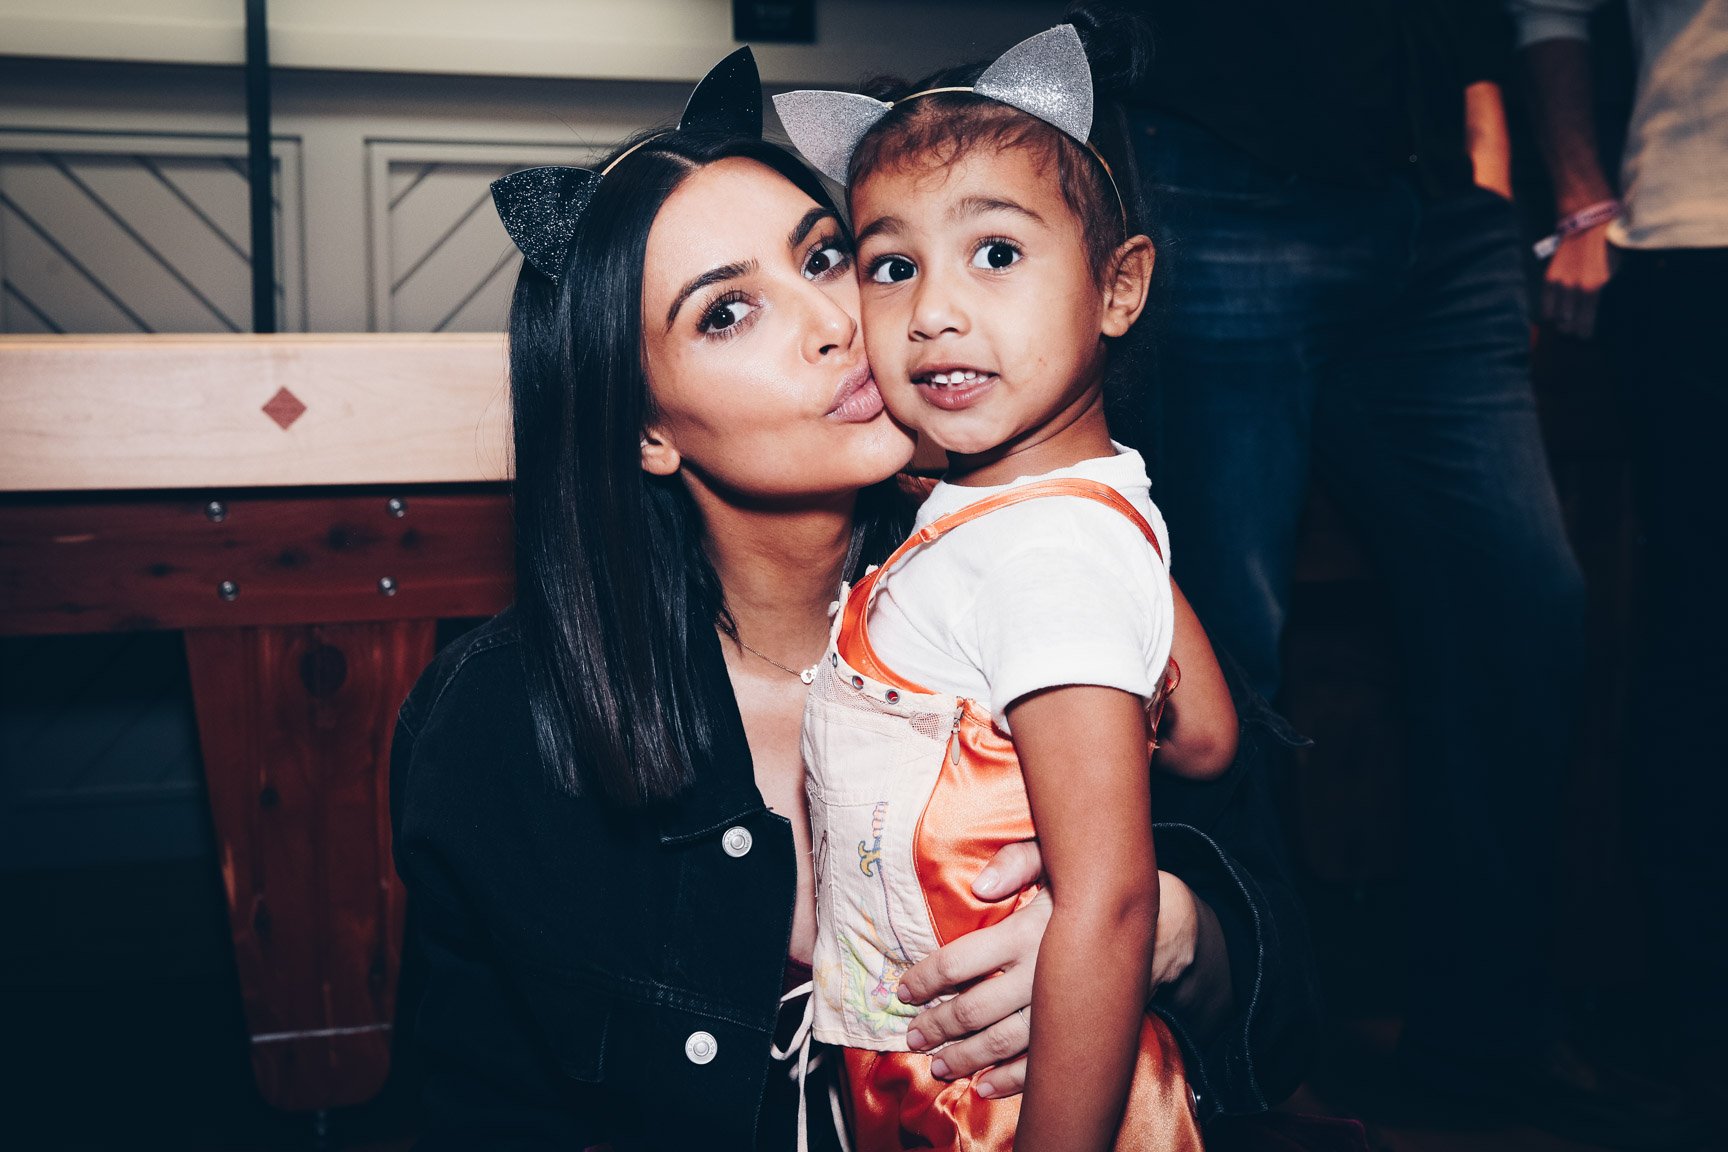 Kim Kardashian West Posted a Photo of Her Kids and Fans Are Calling North West an ‘Only Child’